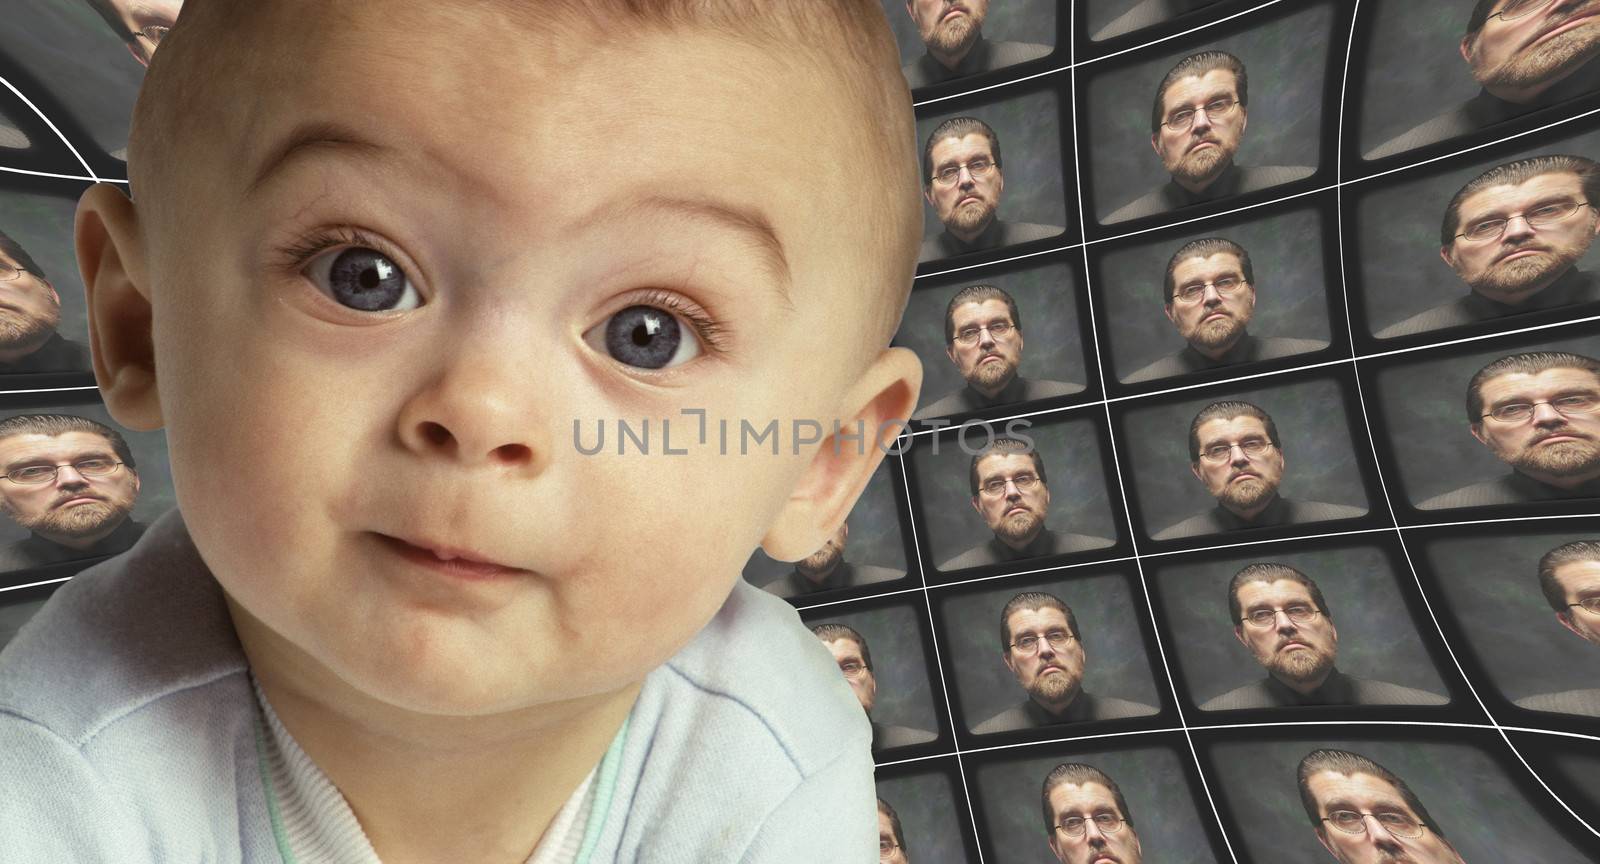 A baby facing the camera surrounded by distorted screens of an Orwellian figure. Child indoctrination by the state.